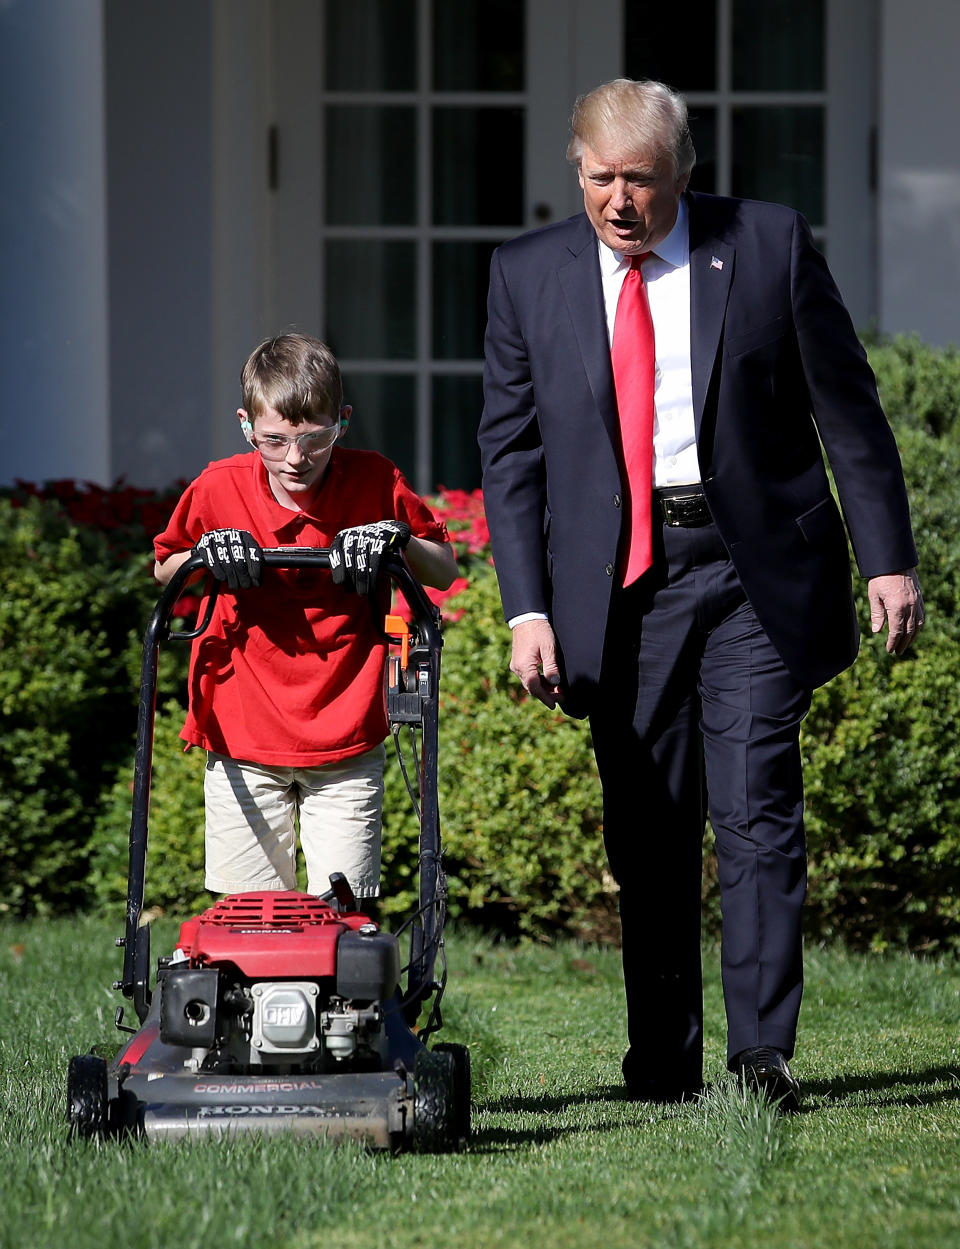 <p>President Donald Trump (R) walks with 11-year-old Frank “FX” Giaccio (L) while he mows the grass in the Rose Garden of the White House September 15, 2017 in Washington, DC. Giaccio, from Falls Church, Virginia, who runs a business called FX Mowing, wrote a letter to Trump expressing admiration for Trump’s business background and offered to mow the White House grass. (Photo: Win McNamee/Getty Images) </p>